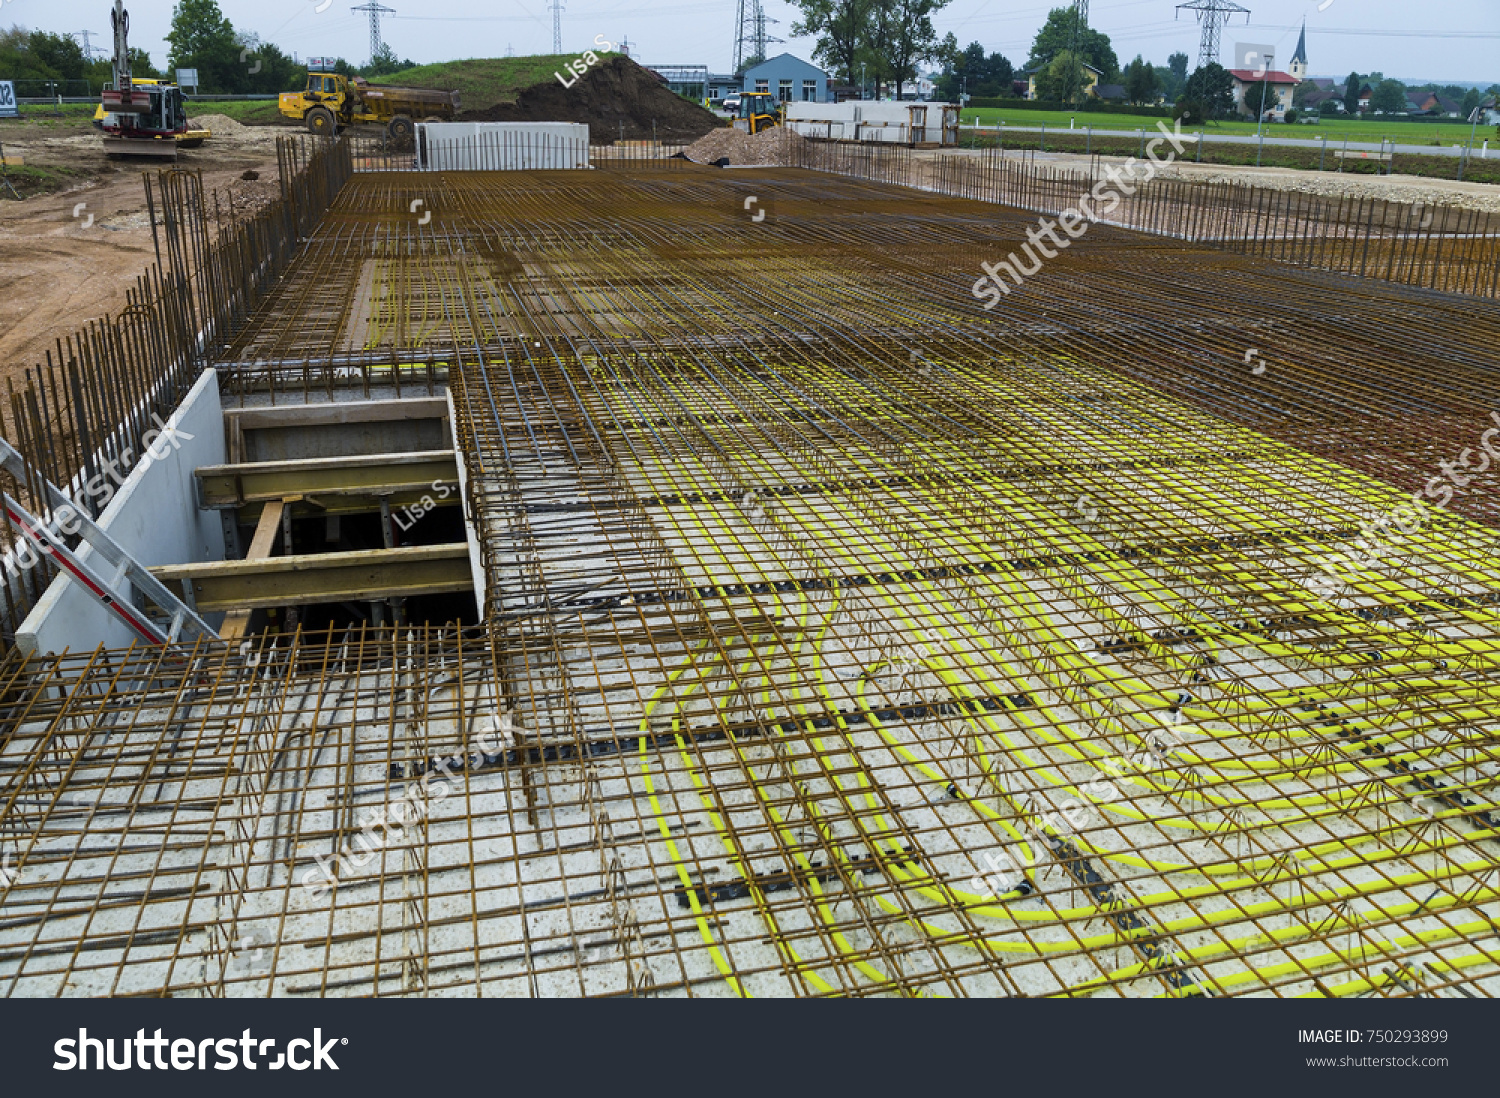 Reinforced Steel Grid On Construction Site Stock Photo 750293899 ...